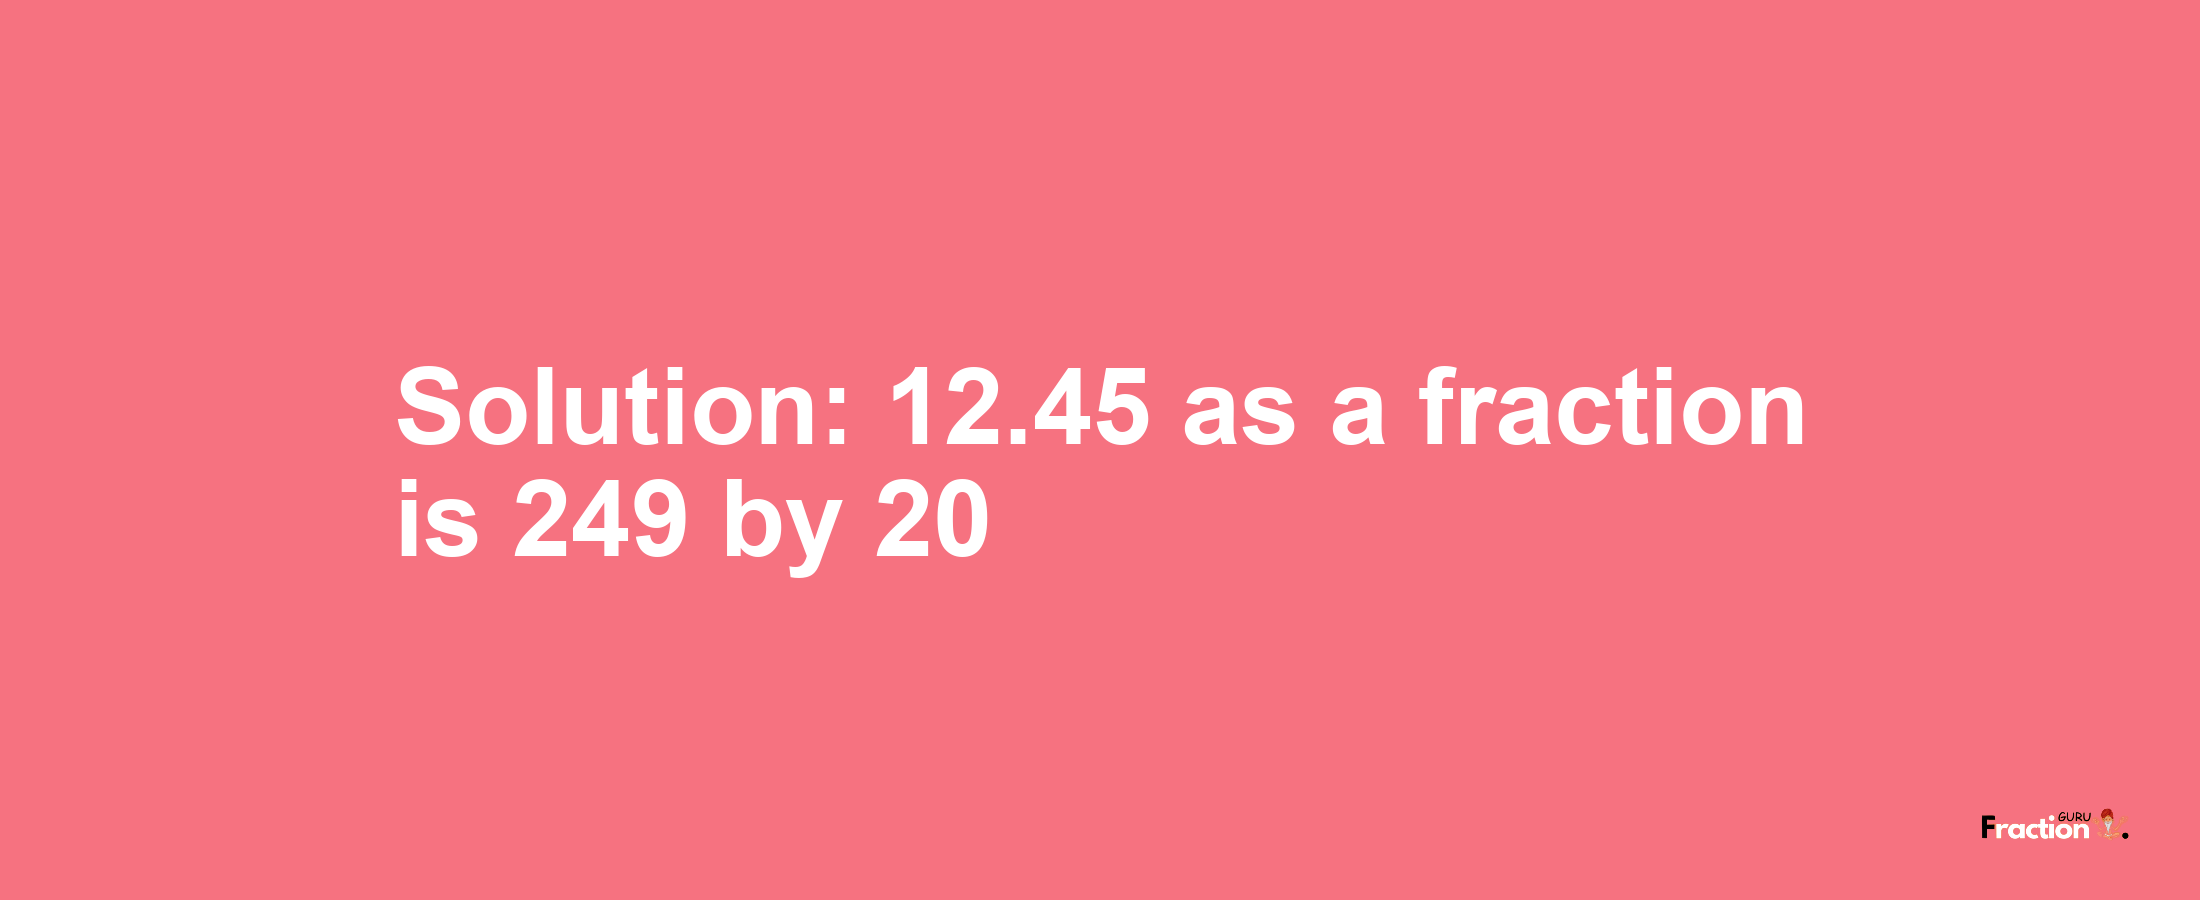 Solution:12.45 as a fraction is 249/20